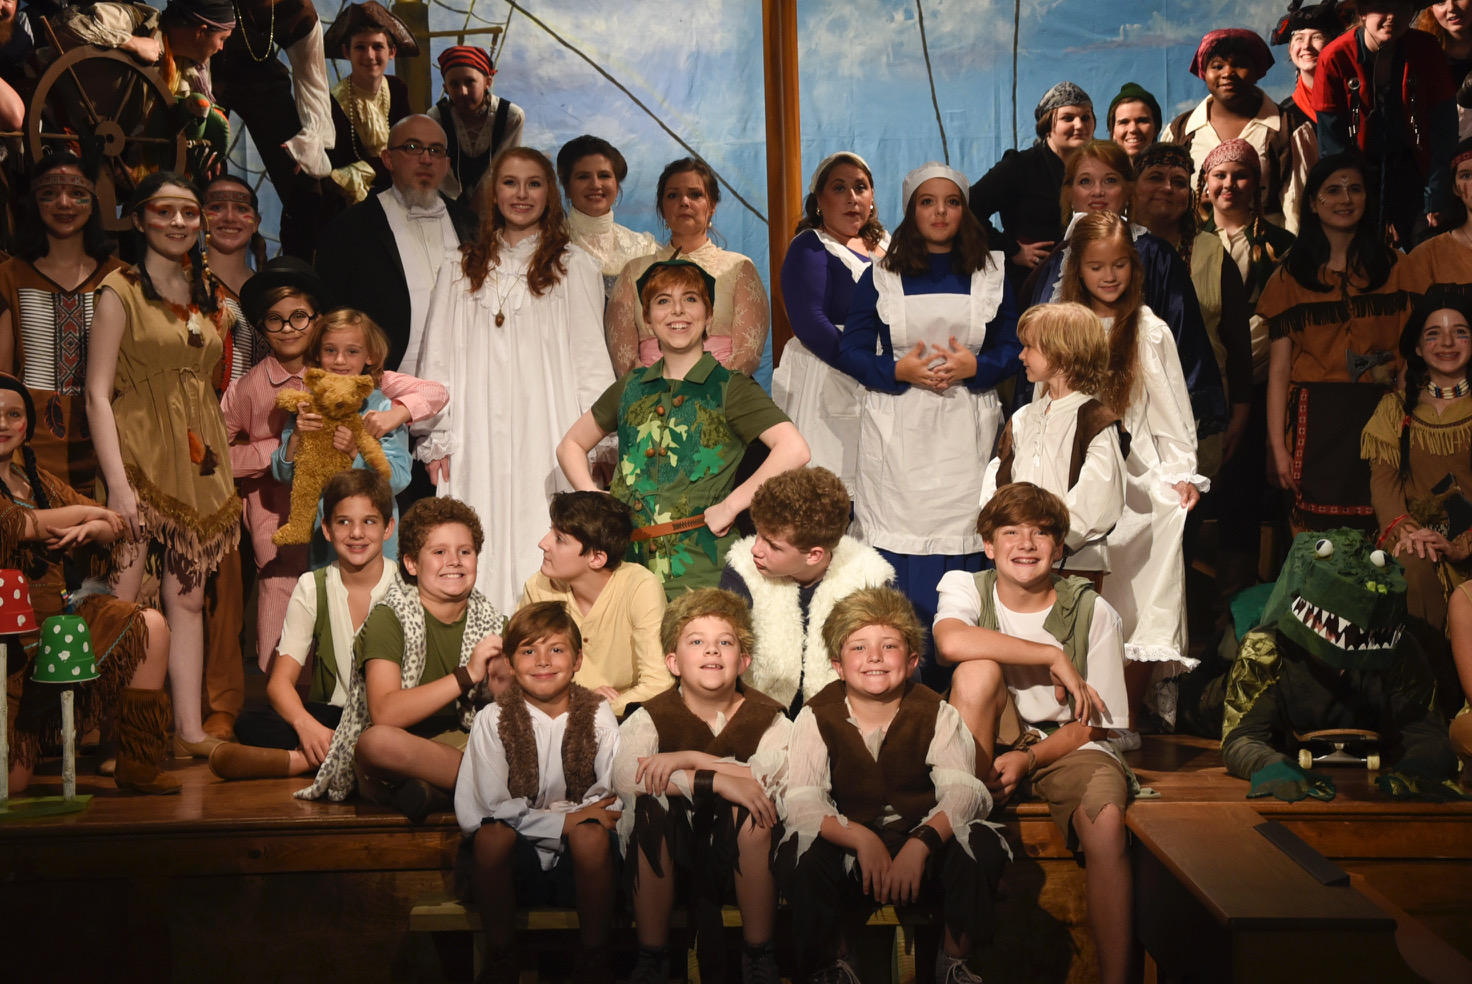 Peter Pan comes to Springville July 25-28